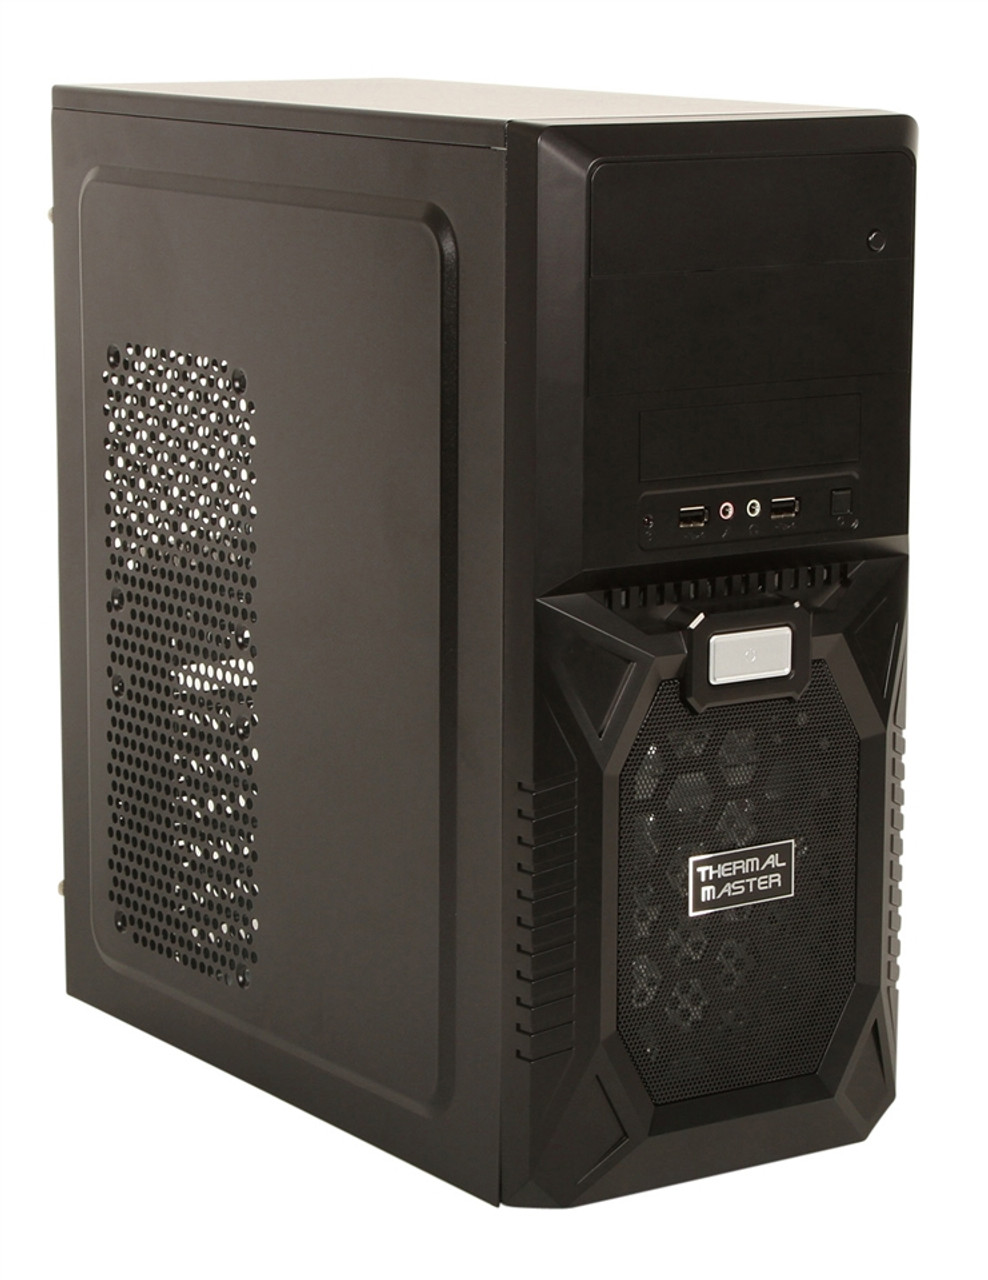 Cooler Master TC102 ATX Mid-Tower Computer Case w/ 500W Power Supply - Black